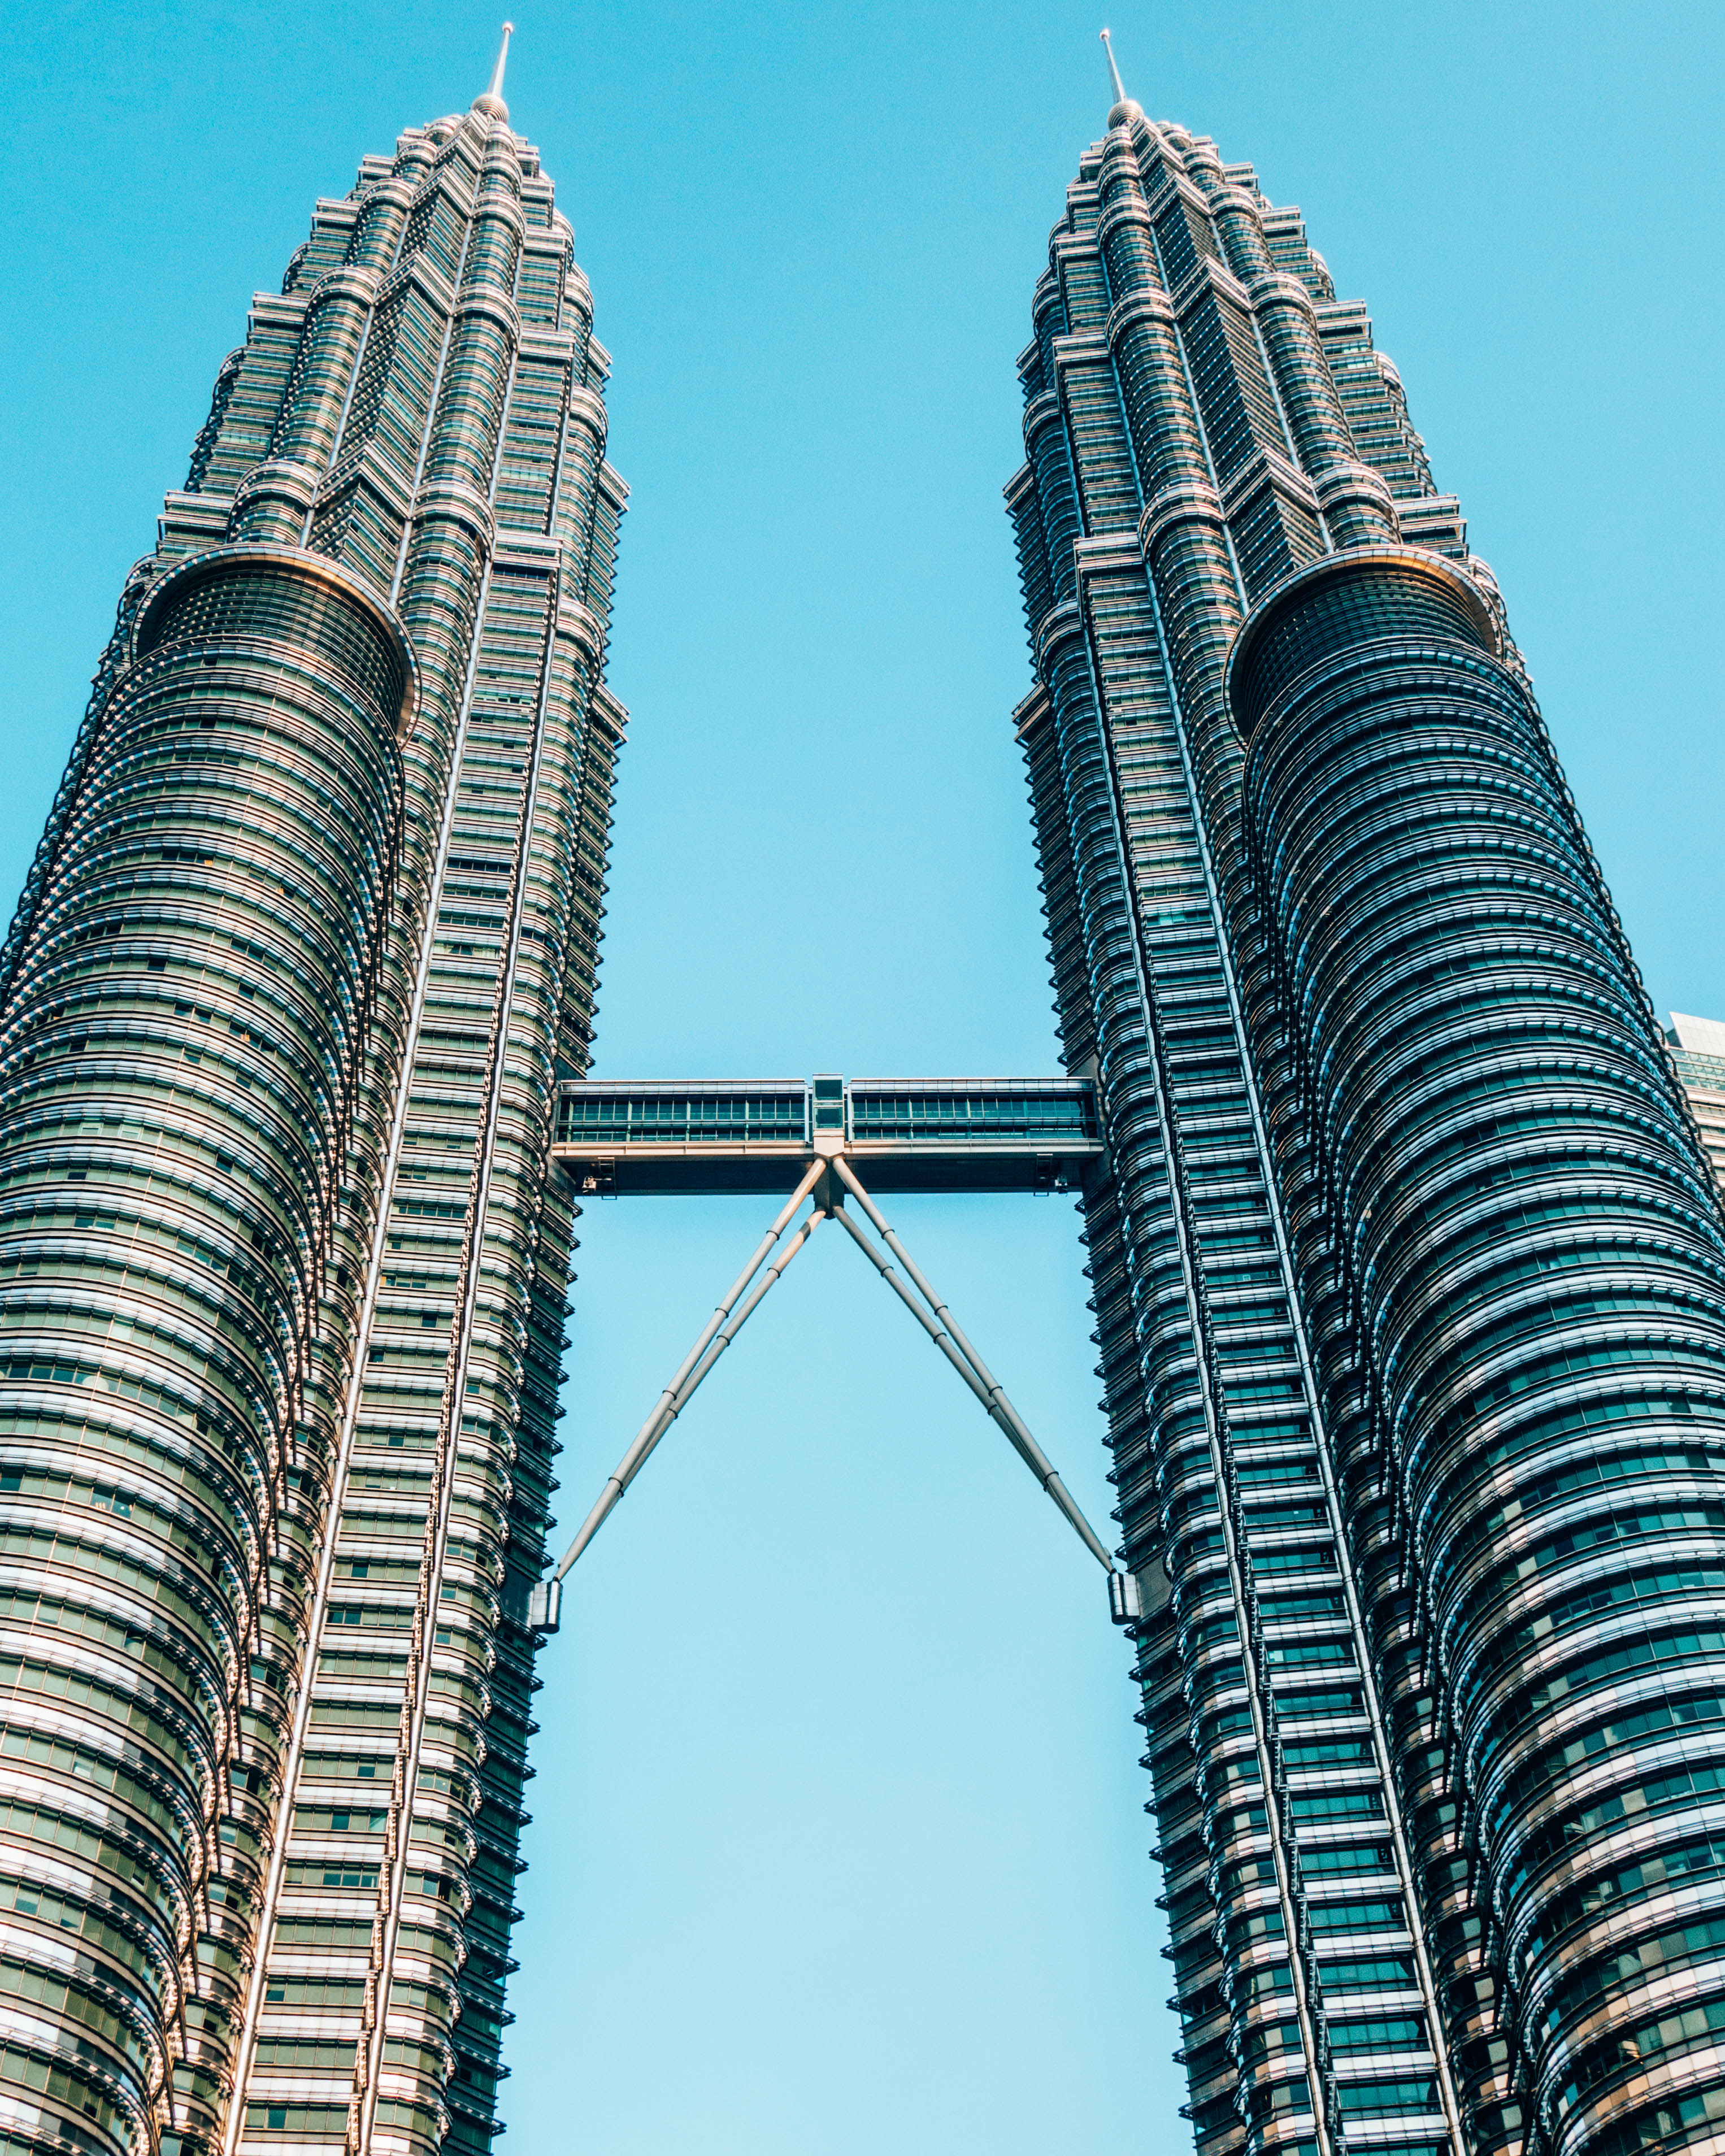 Petronas towers things to do in KL on your first trip - wediditourway.com